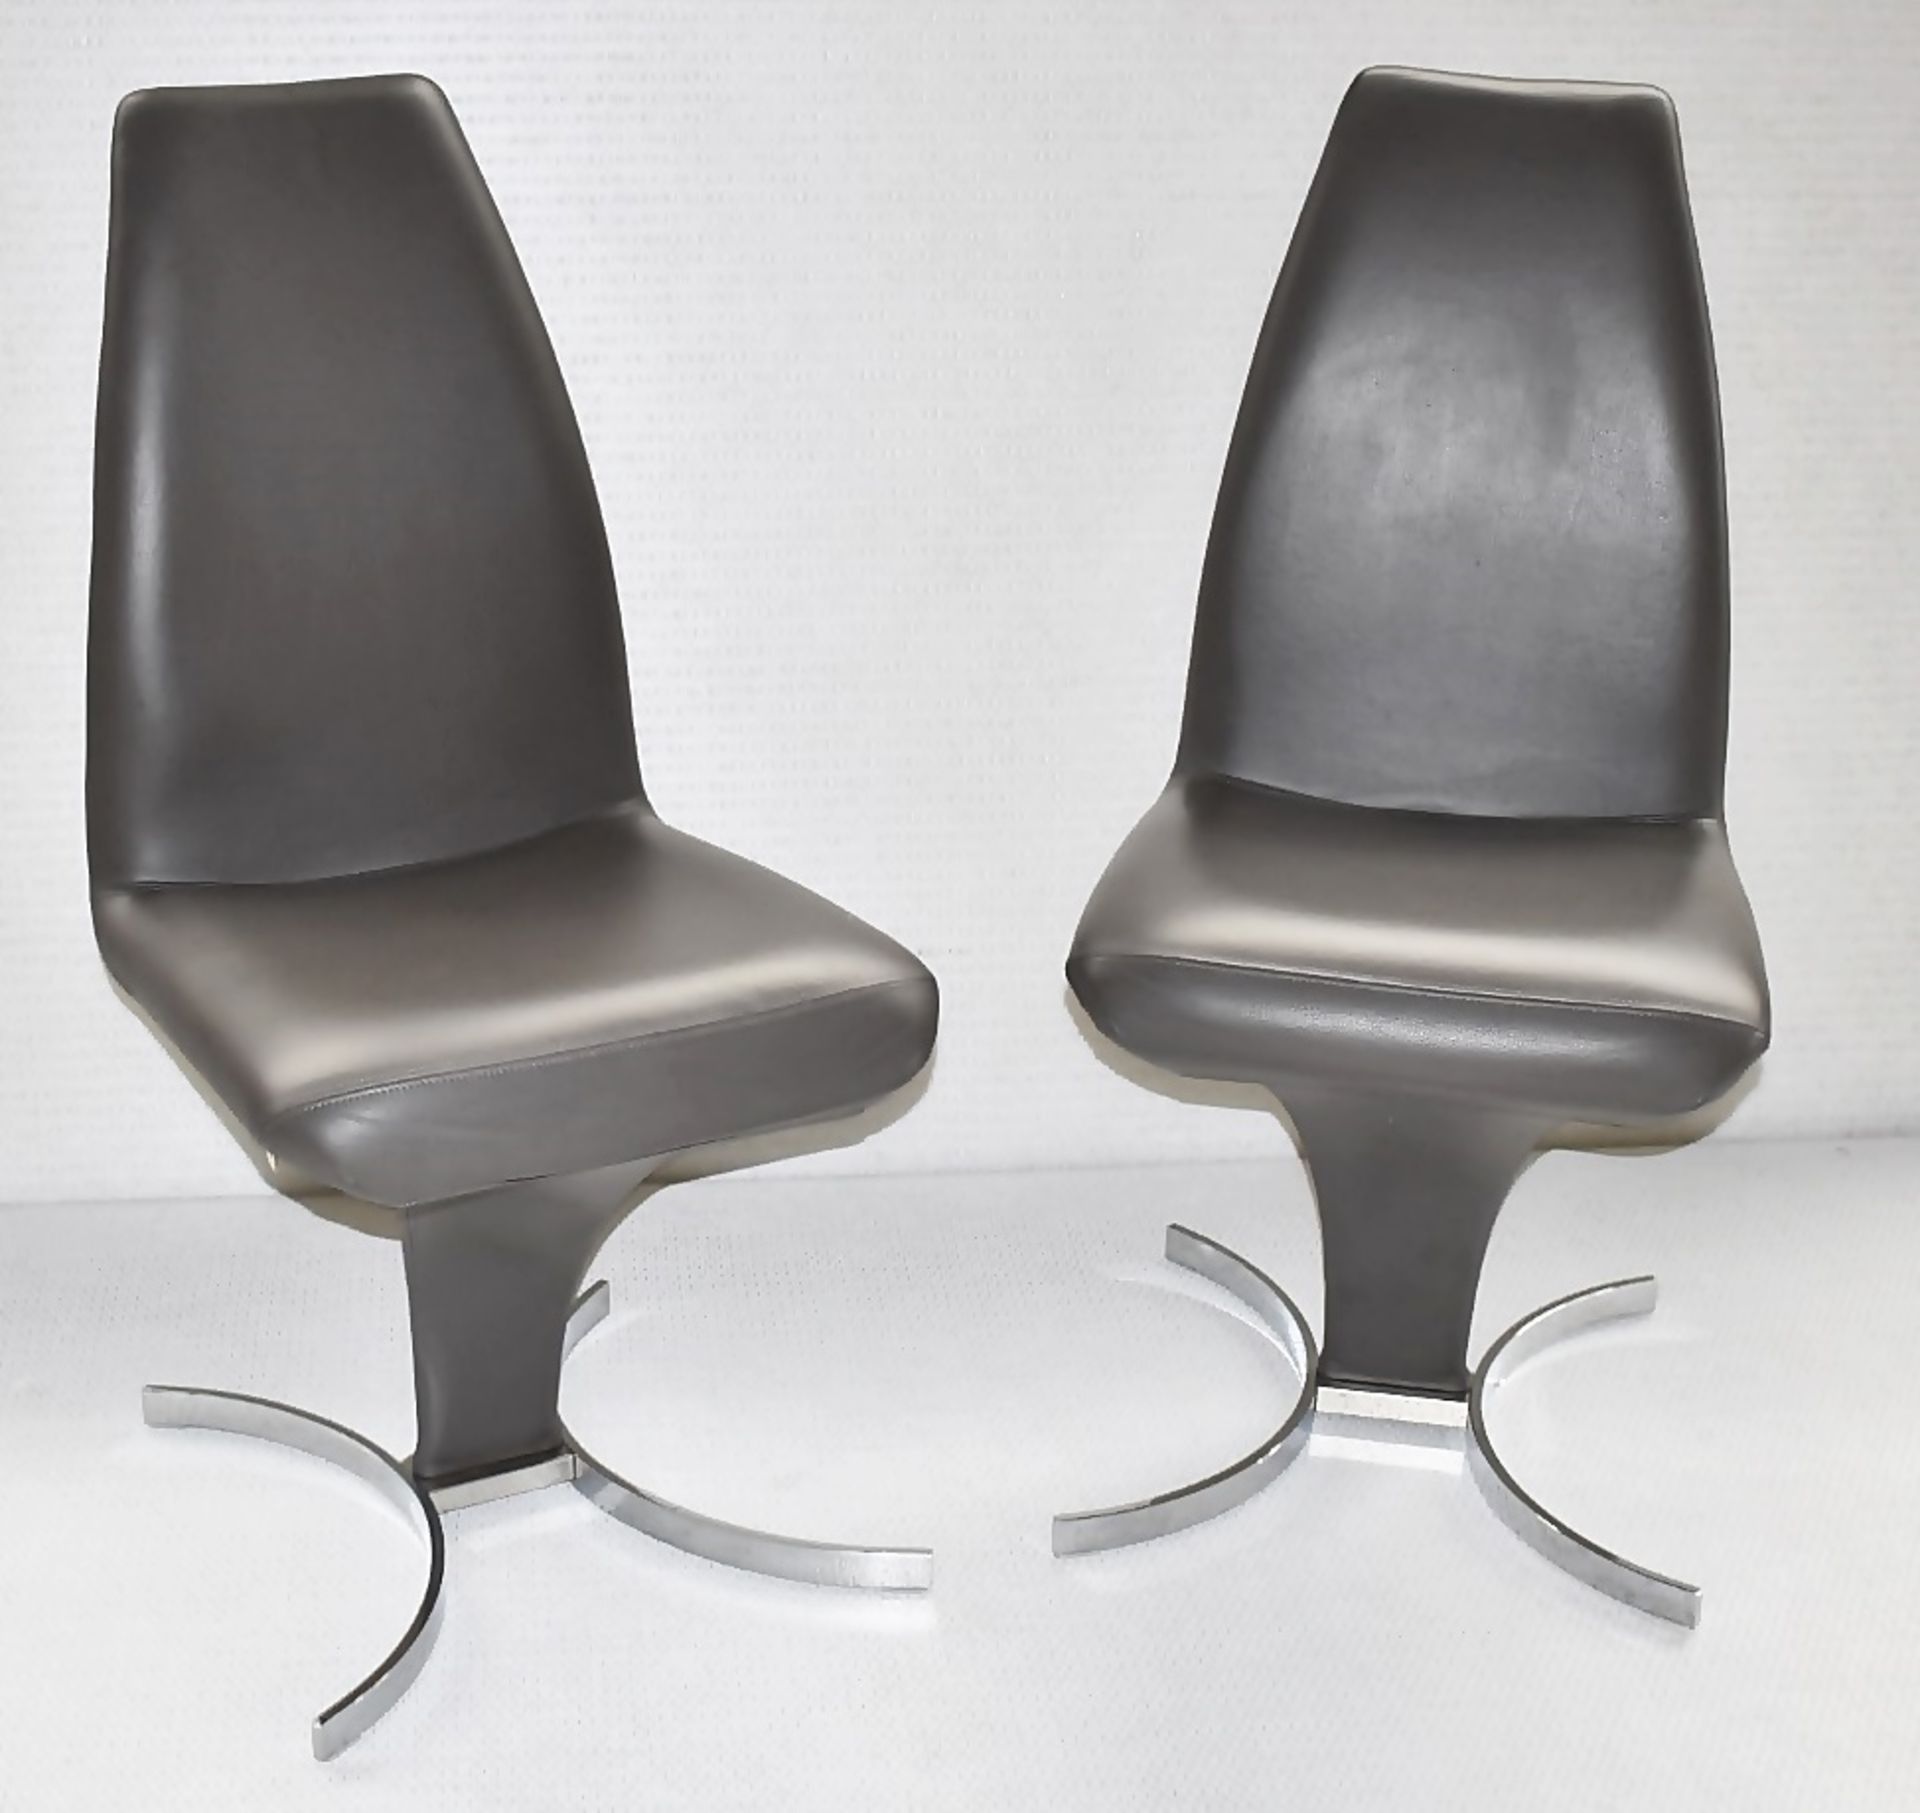 Pair Of CATTELAN ITALIA Luxury Premium Leather Upholstered 'Betty' Dining Chairs - RRP £1,886 - Image 4 of 9